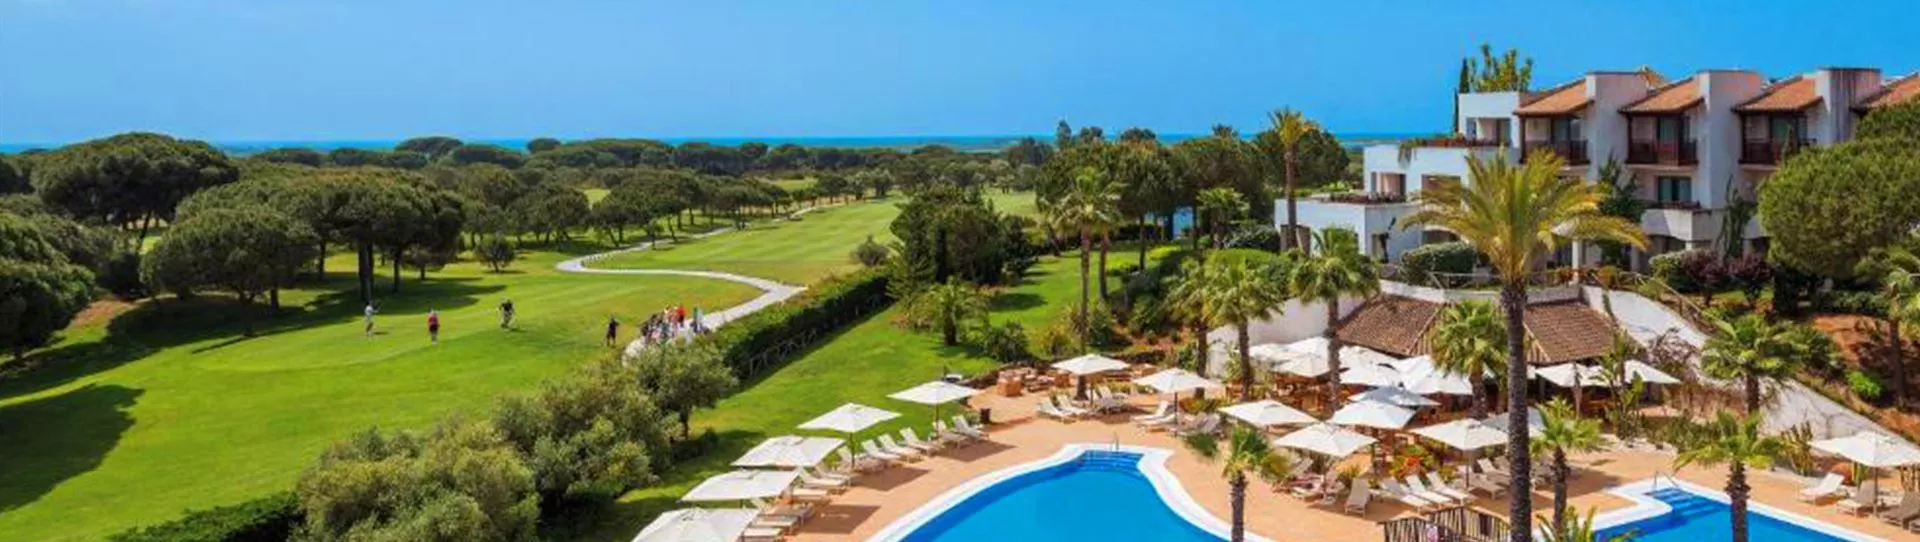 Spain golf holidays - 3 Nights HB & 2 Golf Rounds - Photo 1